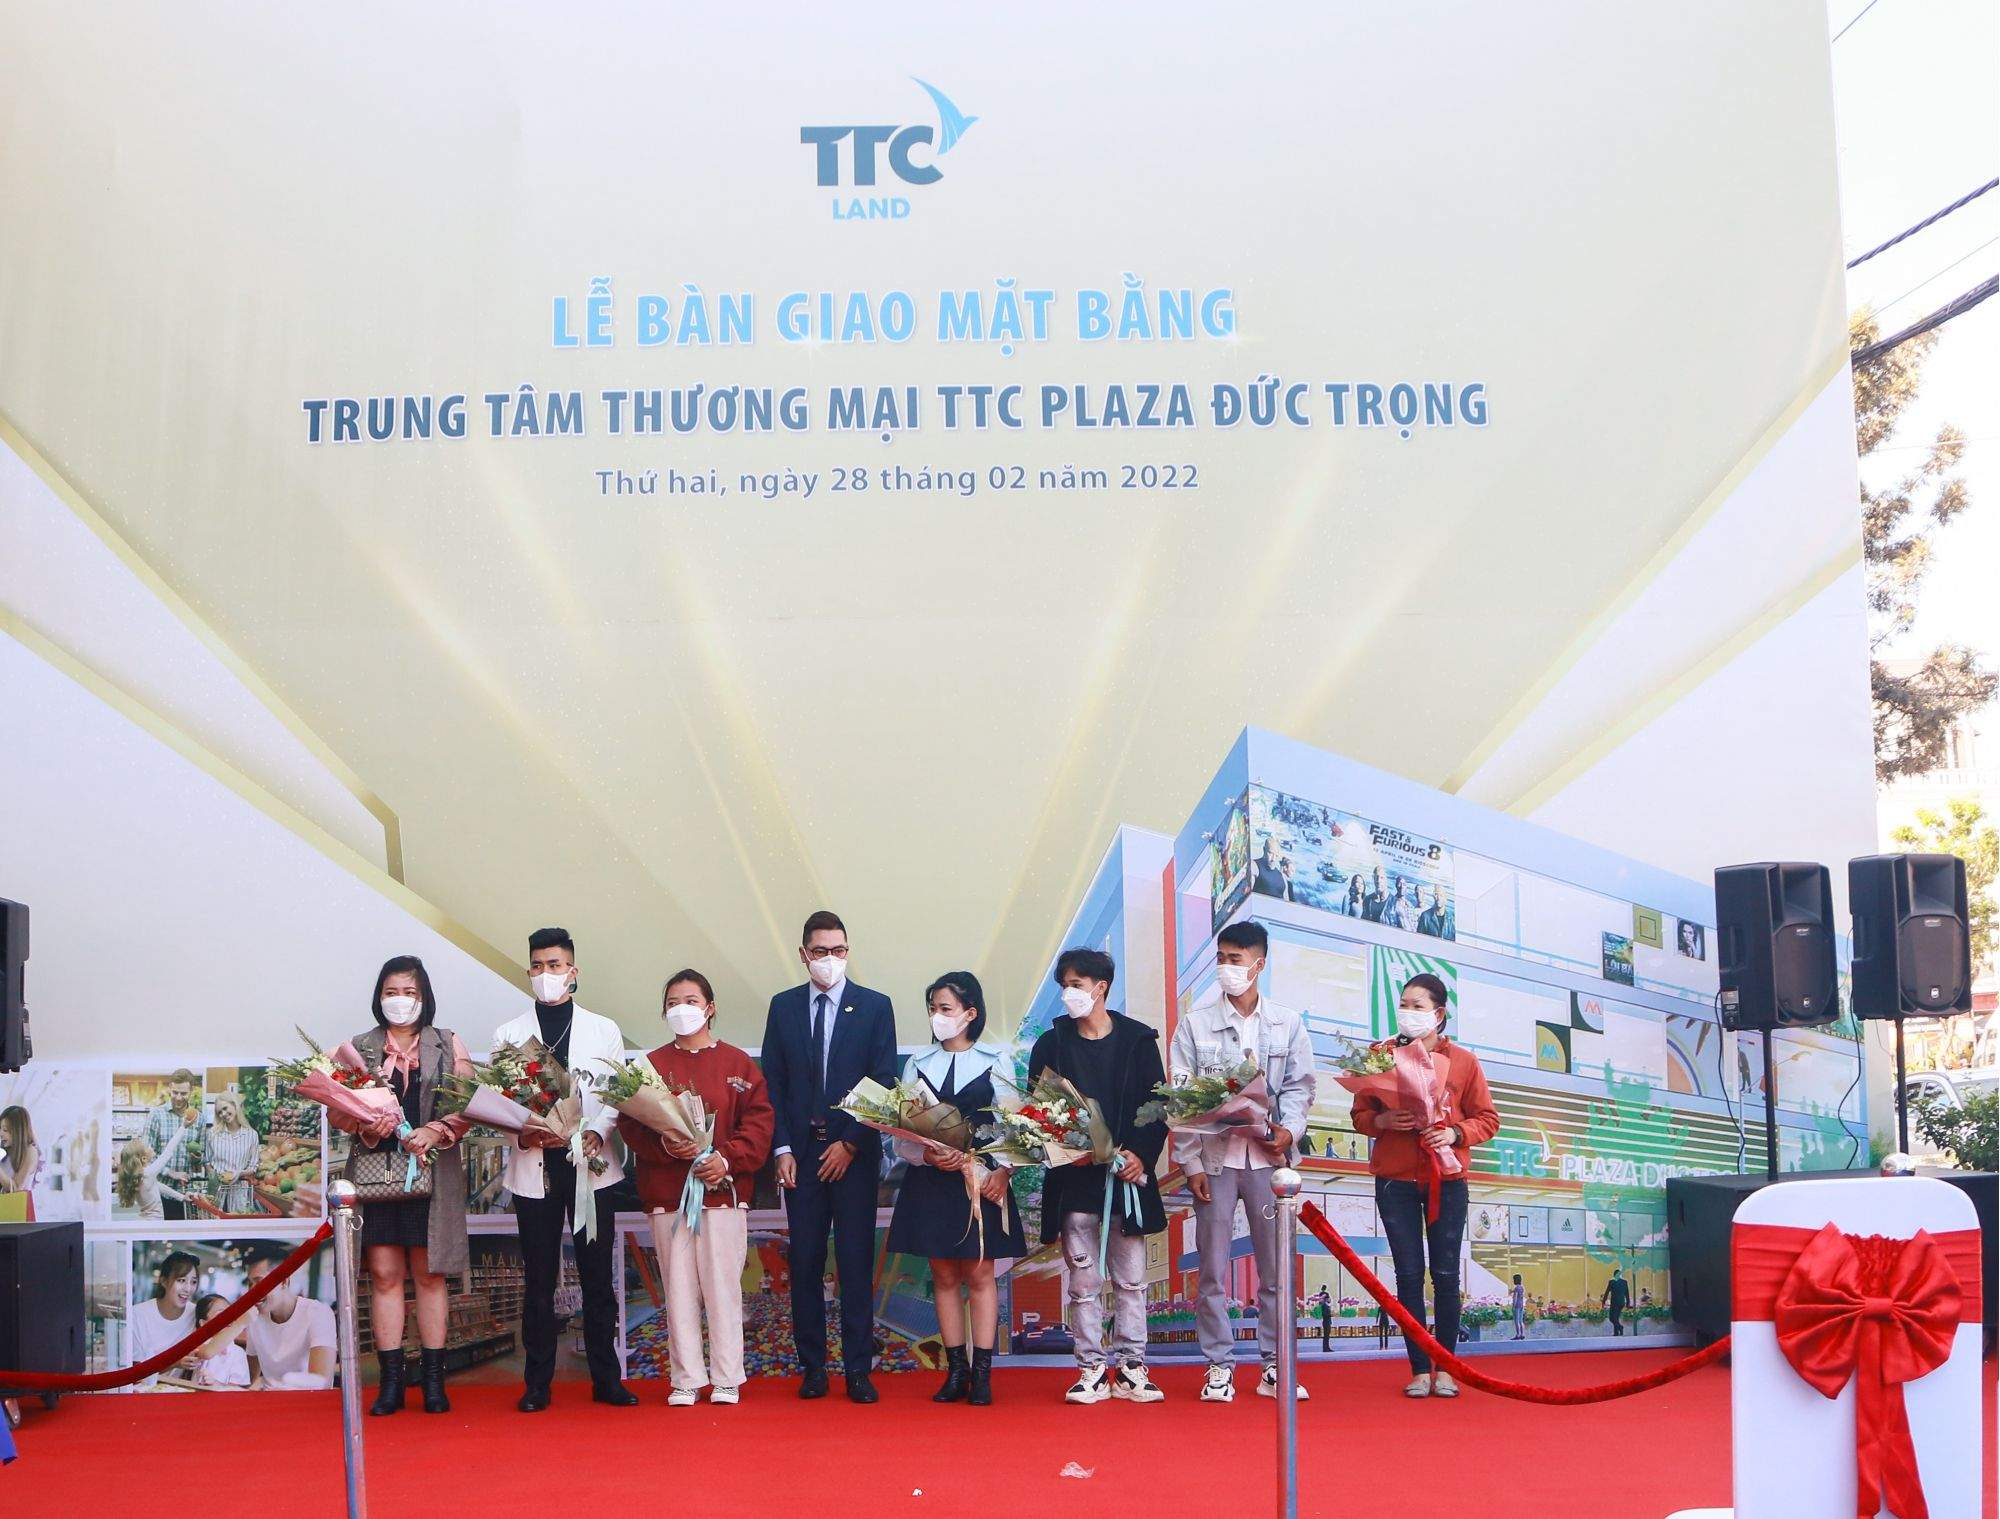 TTC Land successfully held the TTC Plaza Duc Trong handover ceremony